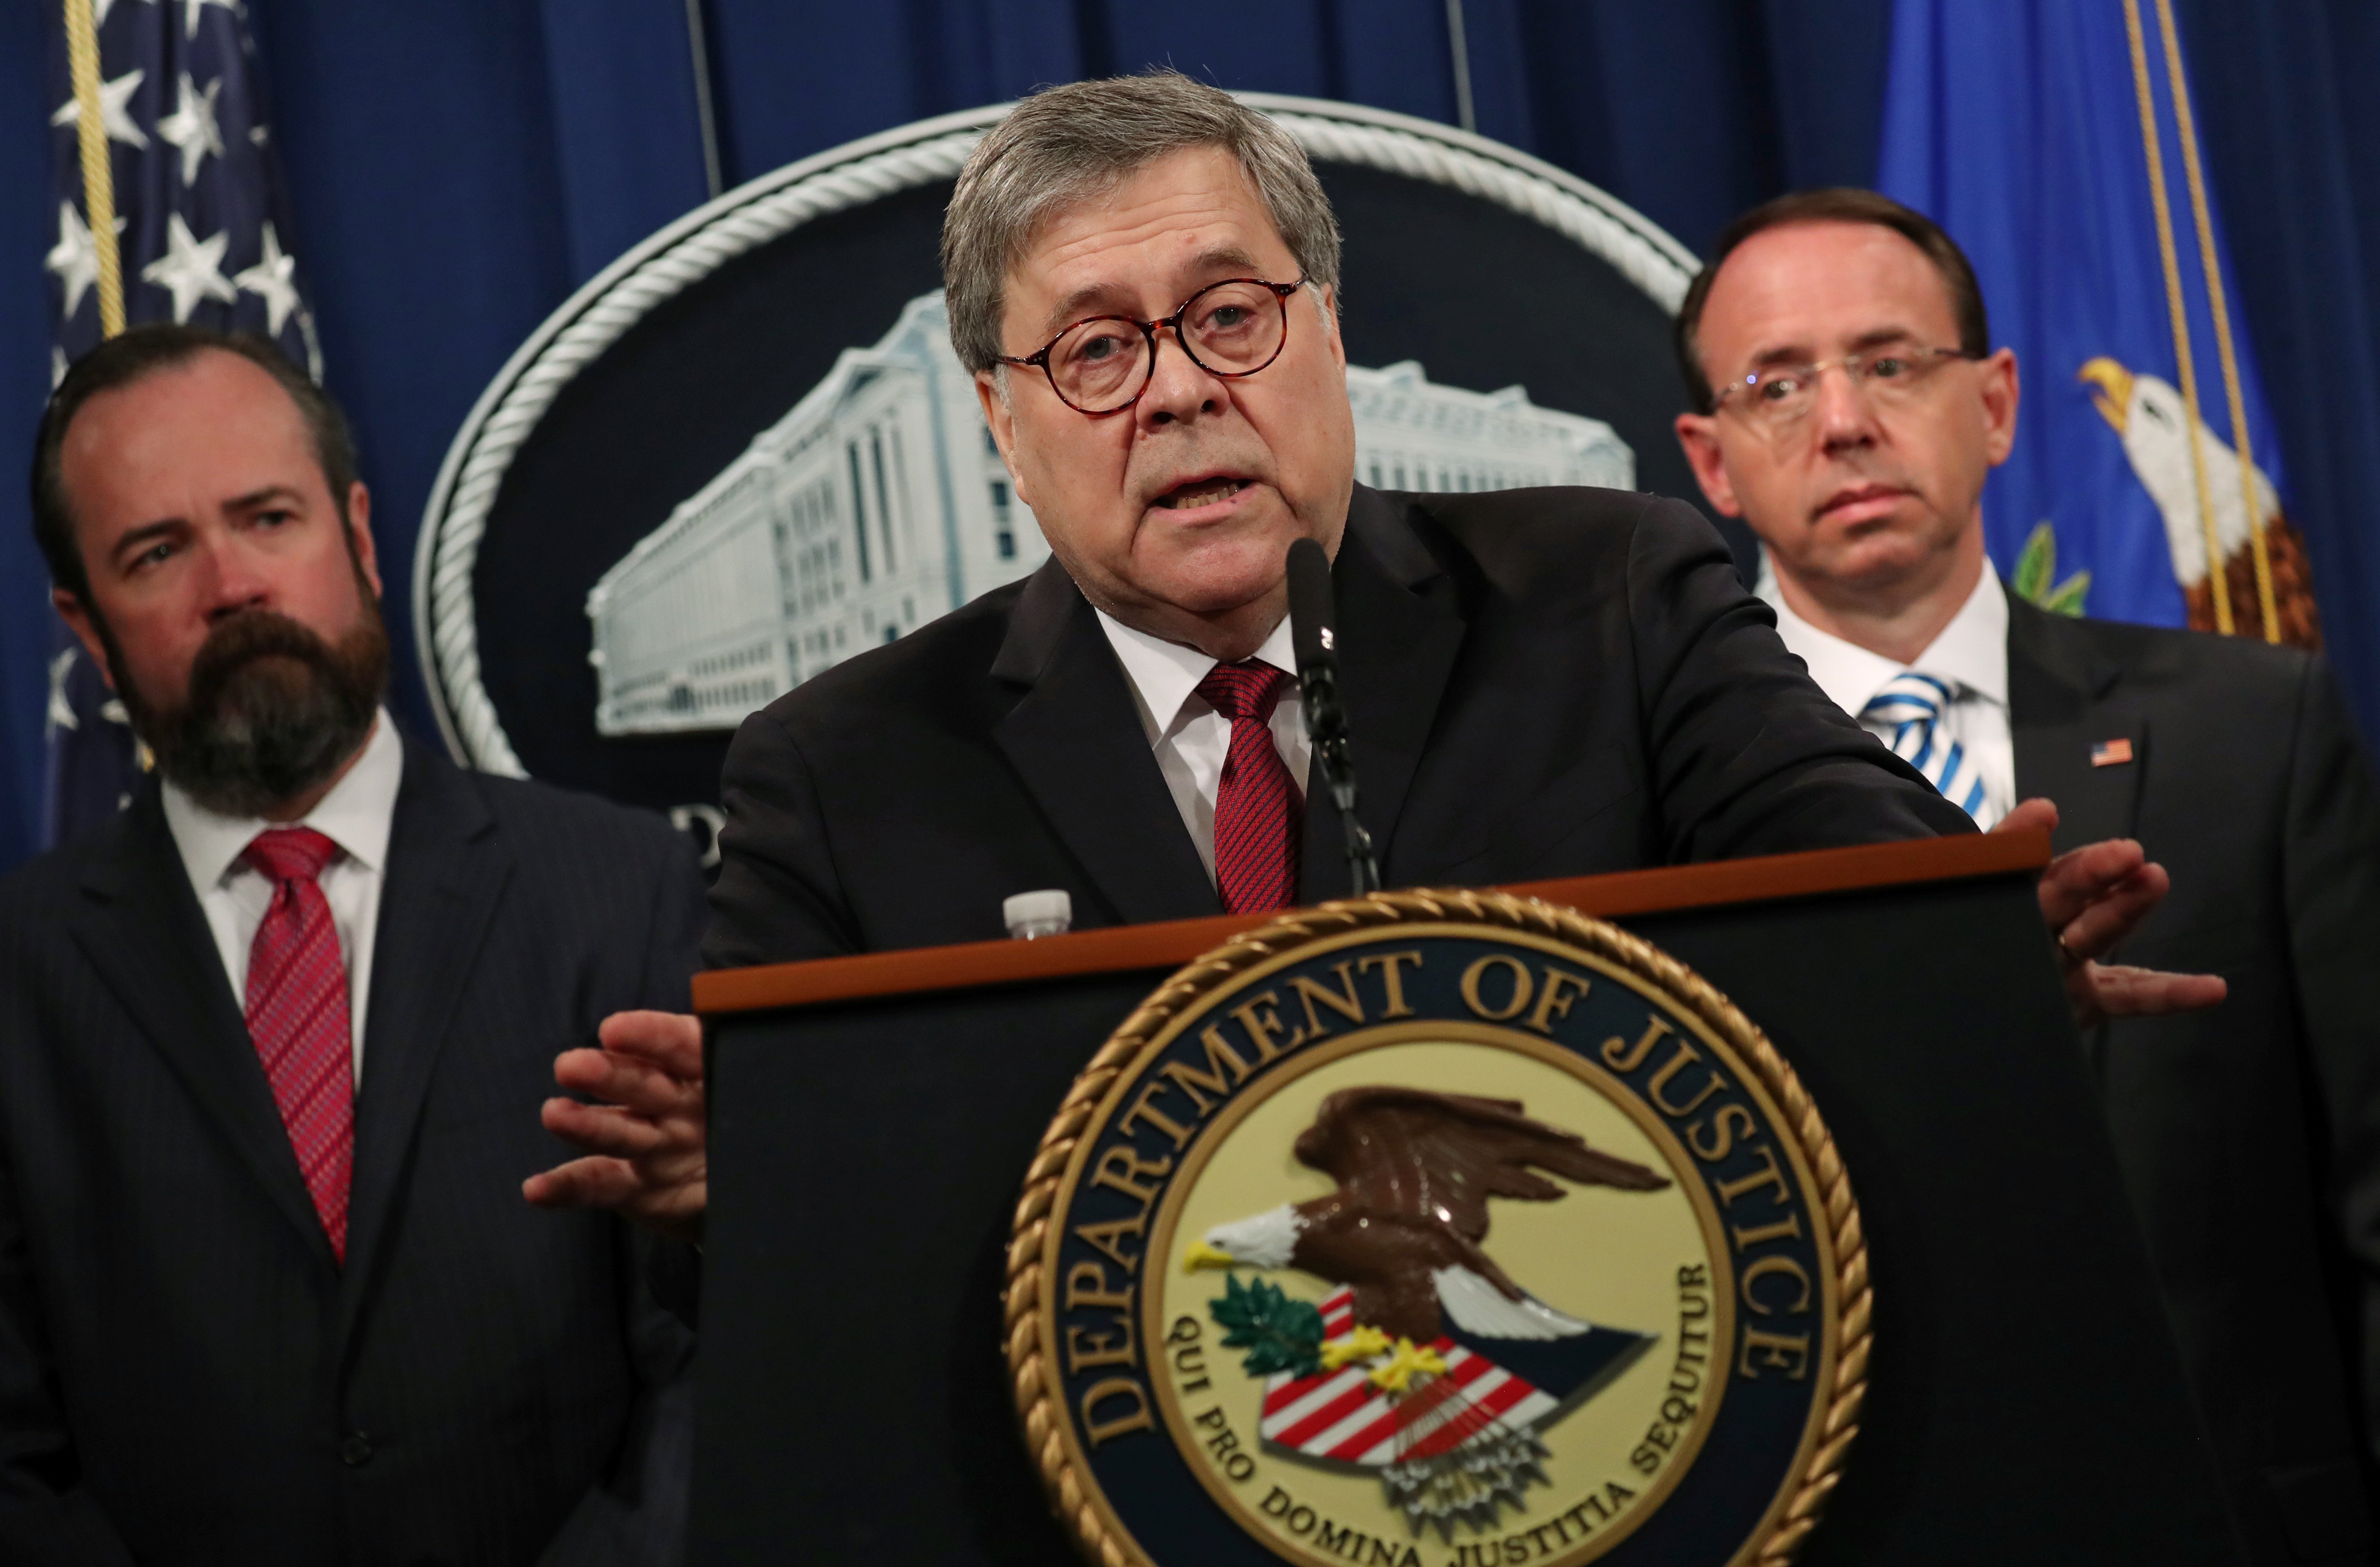 U.S. Attorney General Barr speaks at a news conference to discuss Special Counsel Robert Mueller’s report on Russian interference in the 2016 U.S. presidential race, in Washington